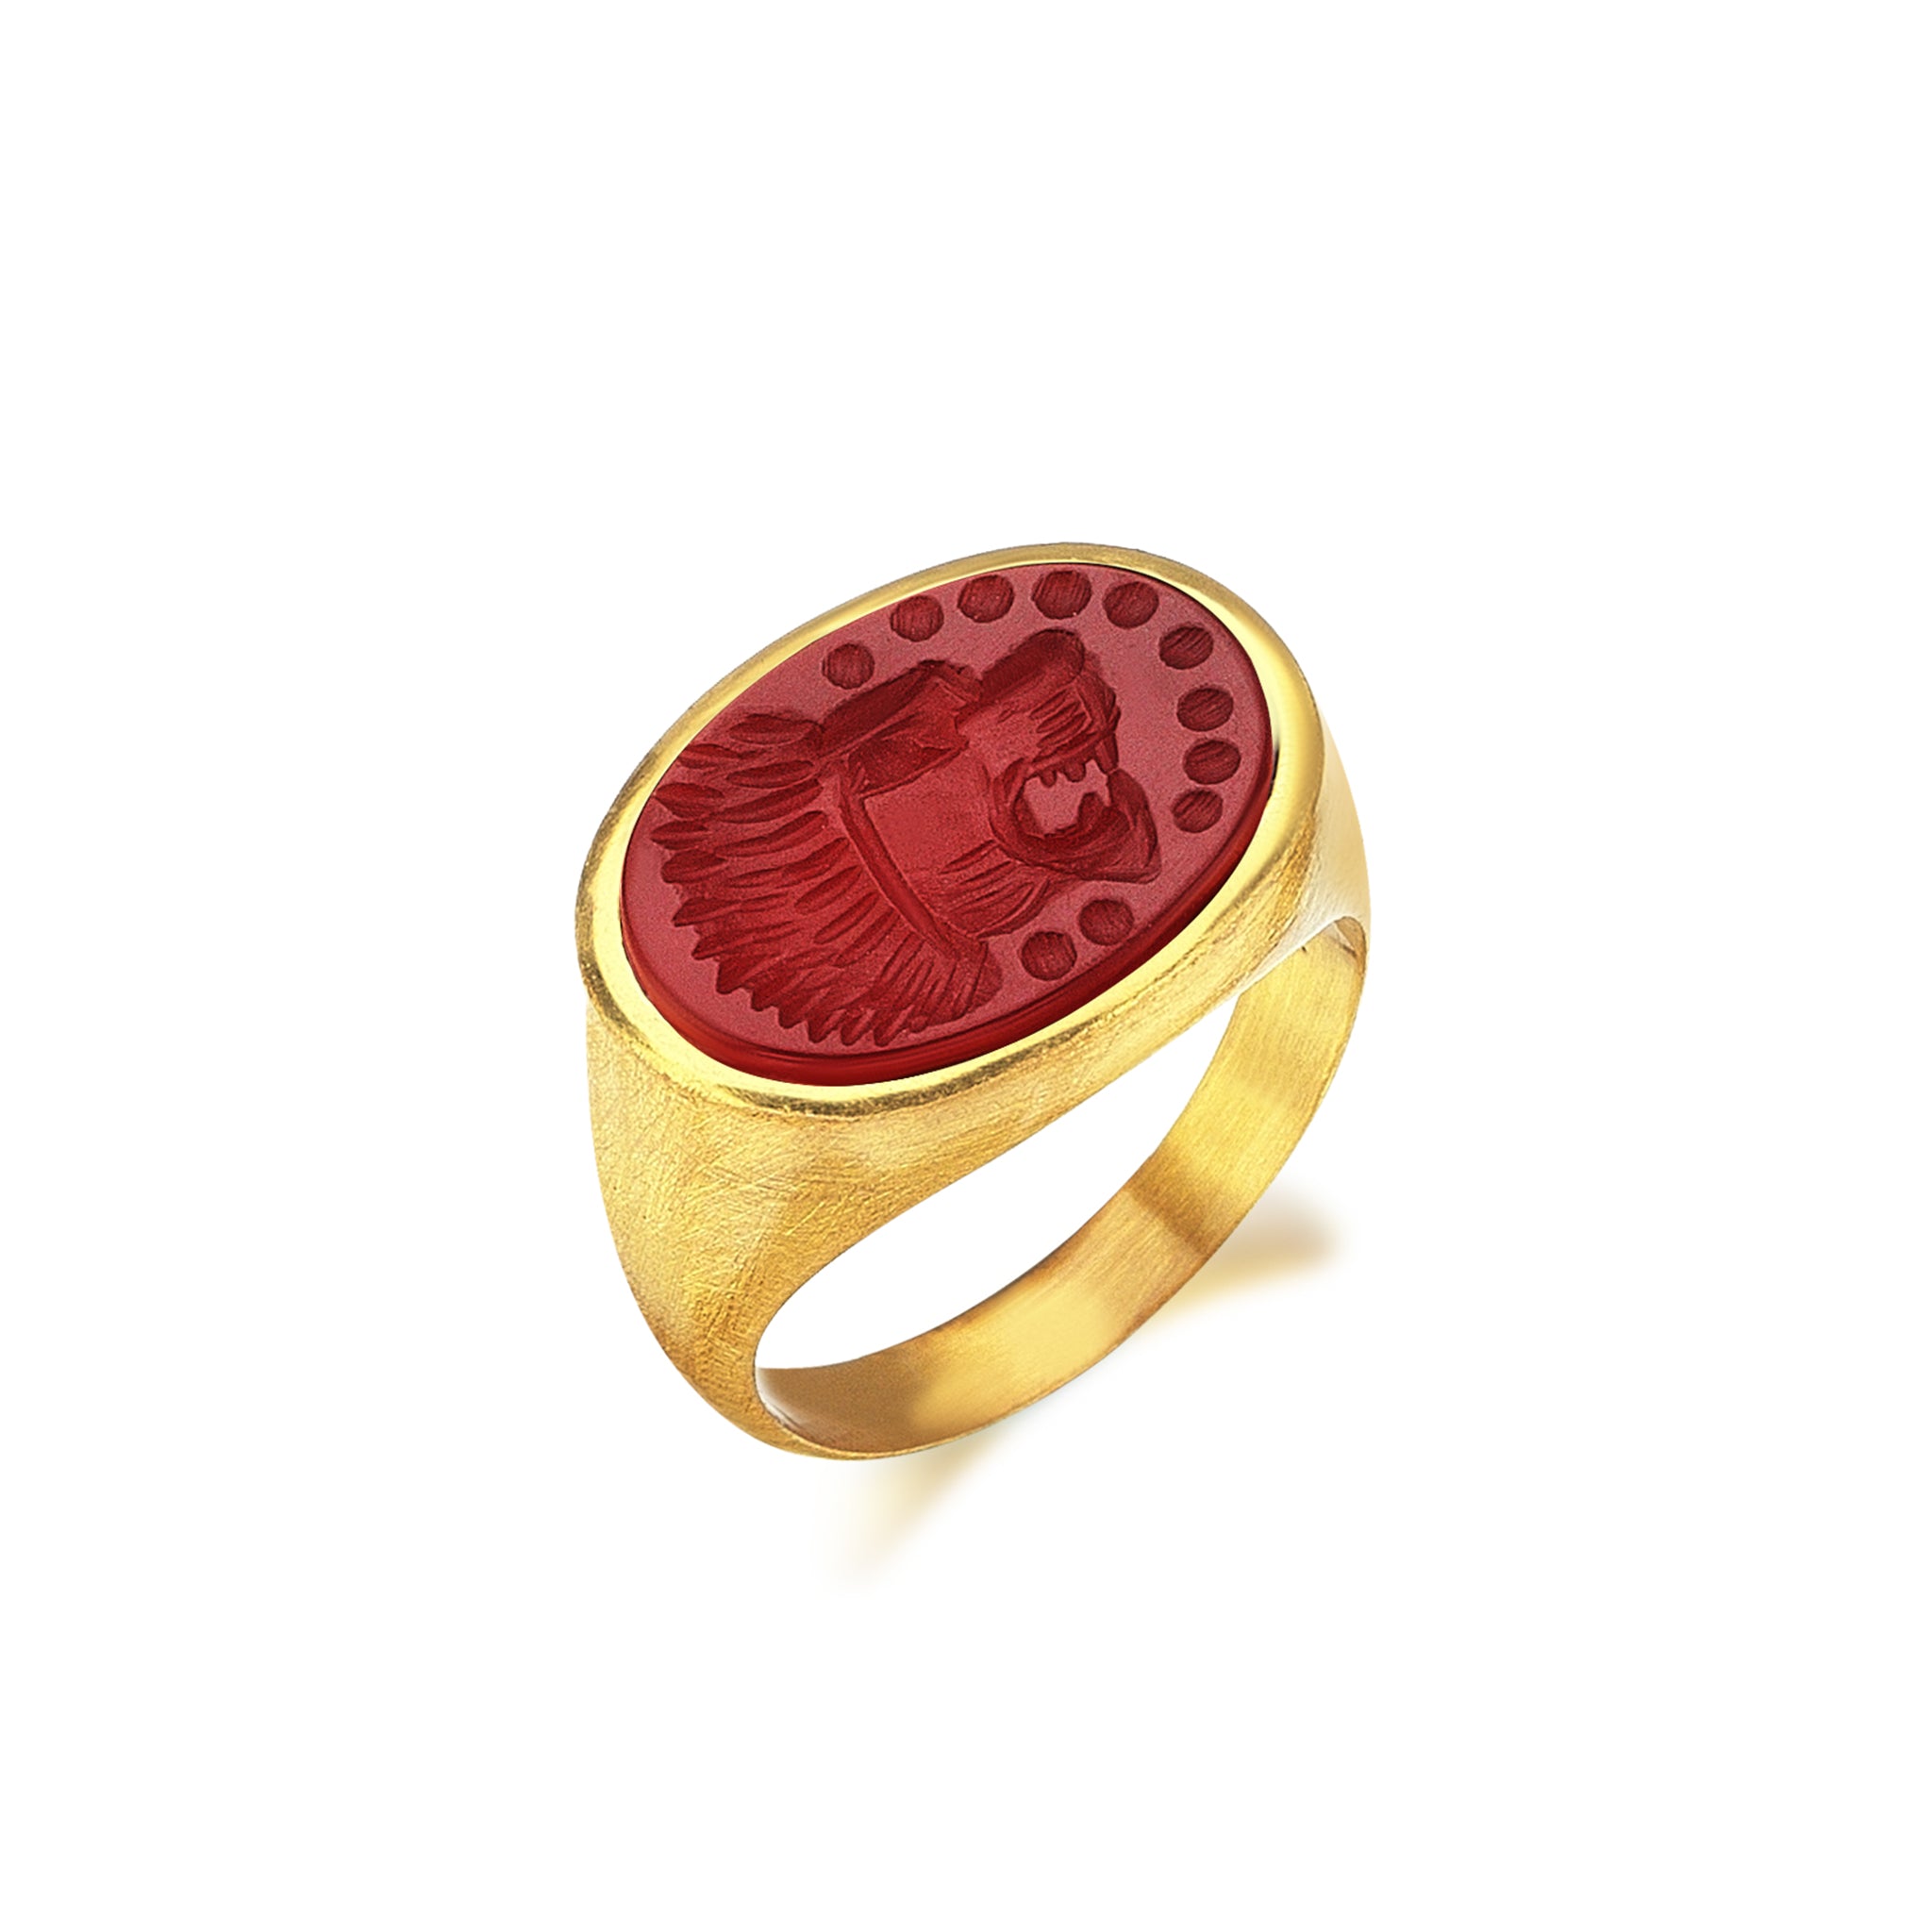 THE LYDIAN LION RING